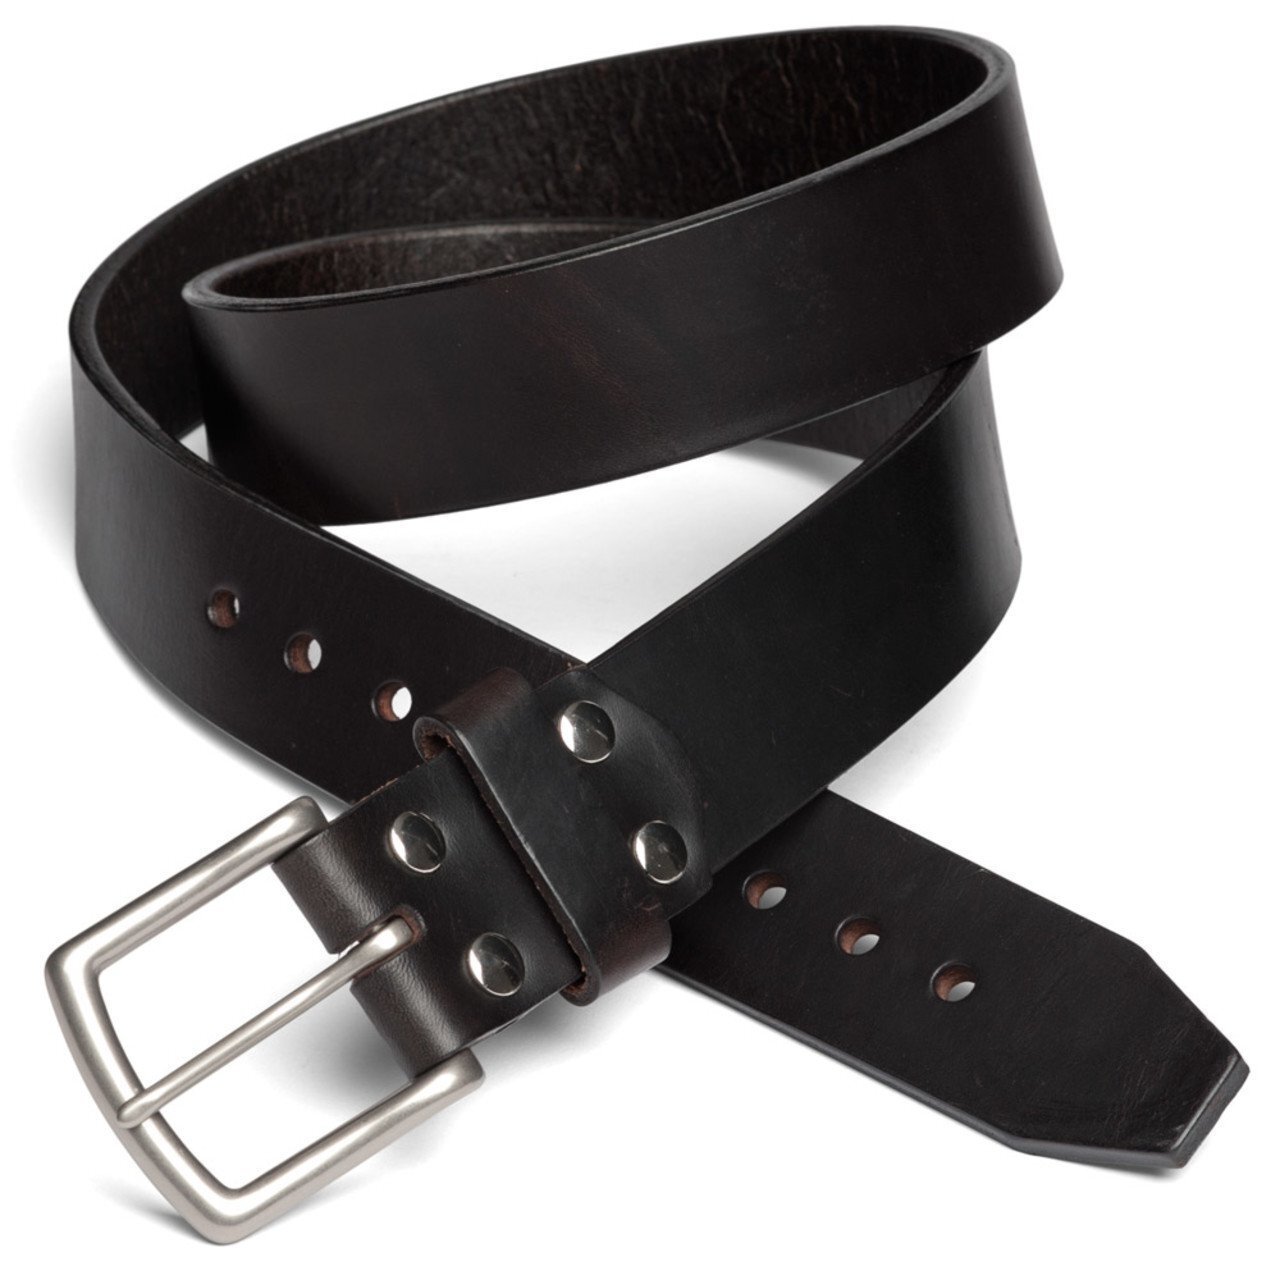 Read more about the article Saddleback Leather – Old Bull Leather Belt